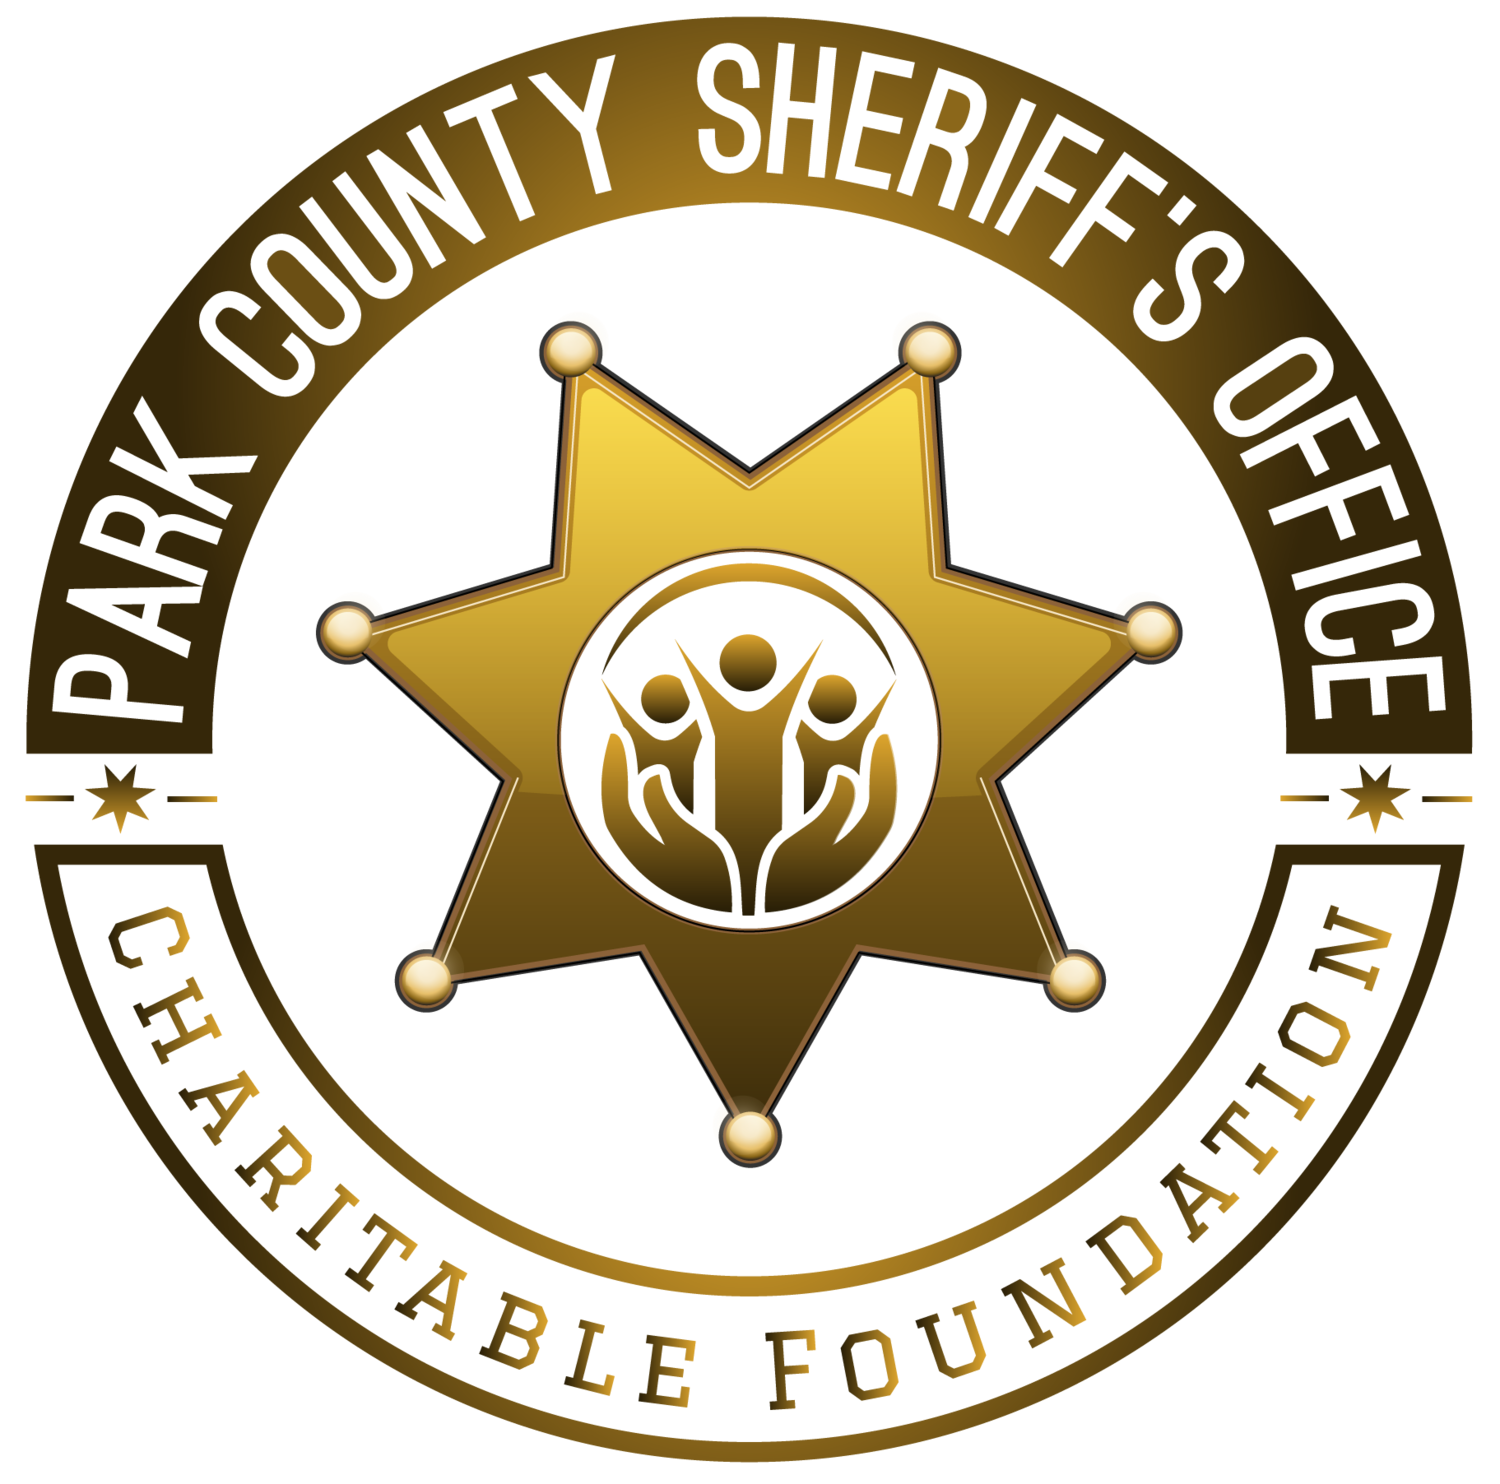 Park County Sheriff Charitable Foundation